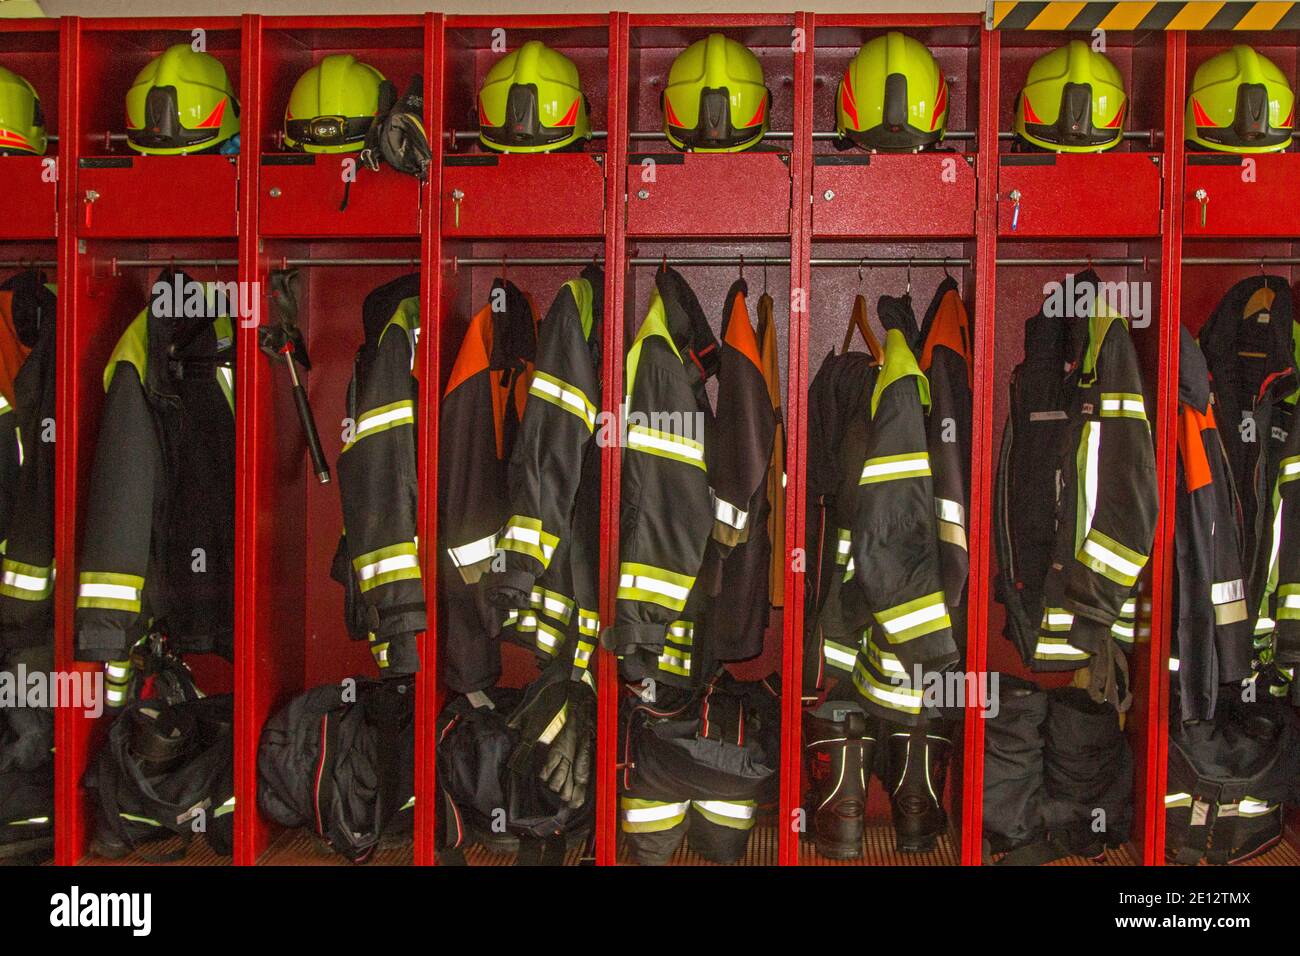 A Look Into The Neatly Organized And Well-organized Clothing And Equipment Locker Of A Fire Station Stock Photo